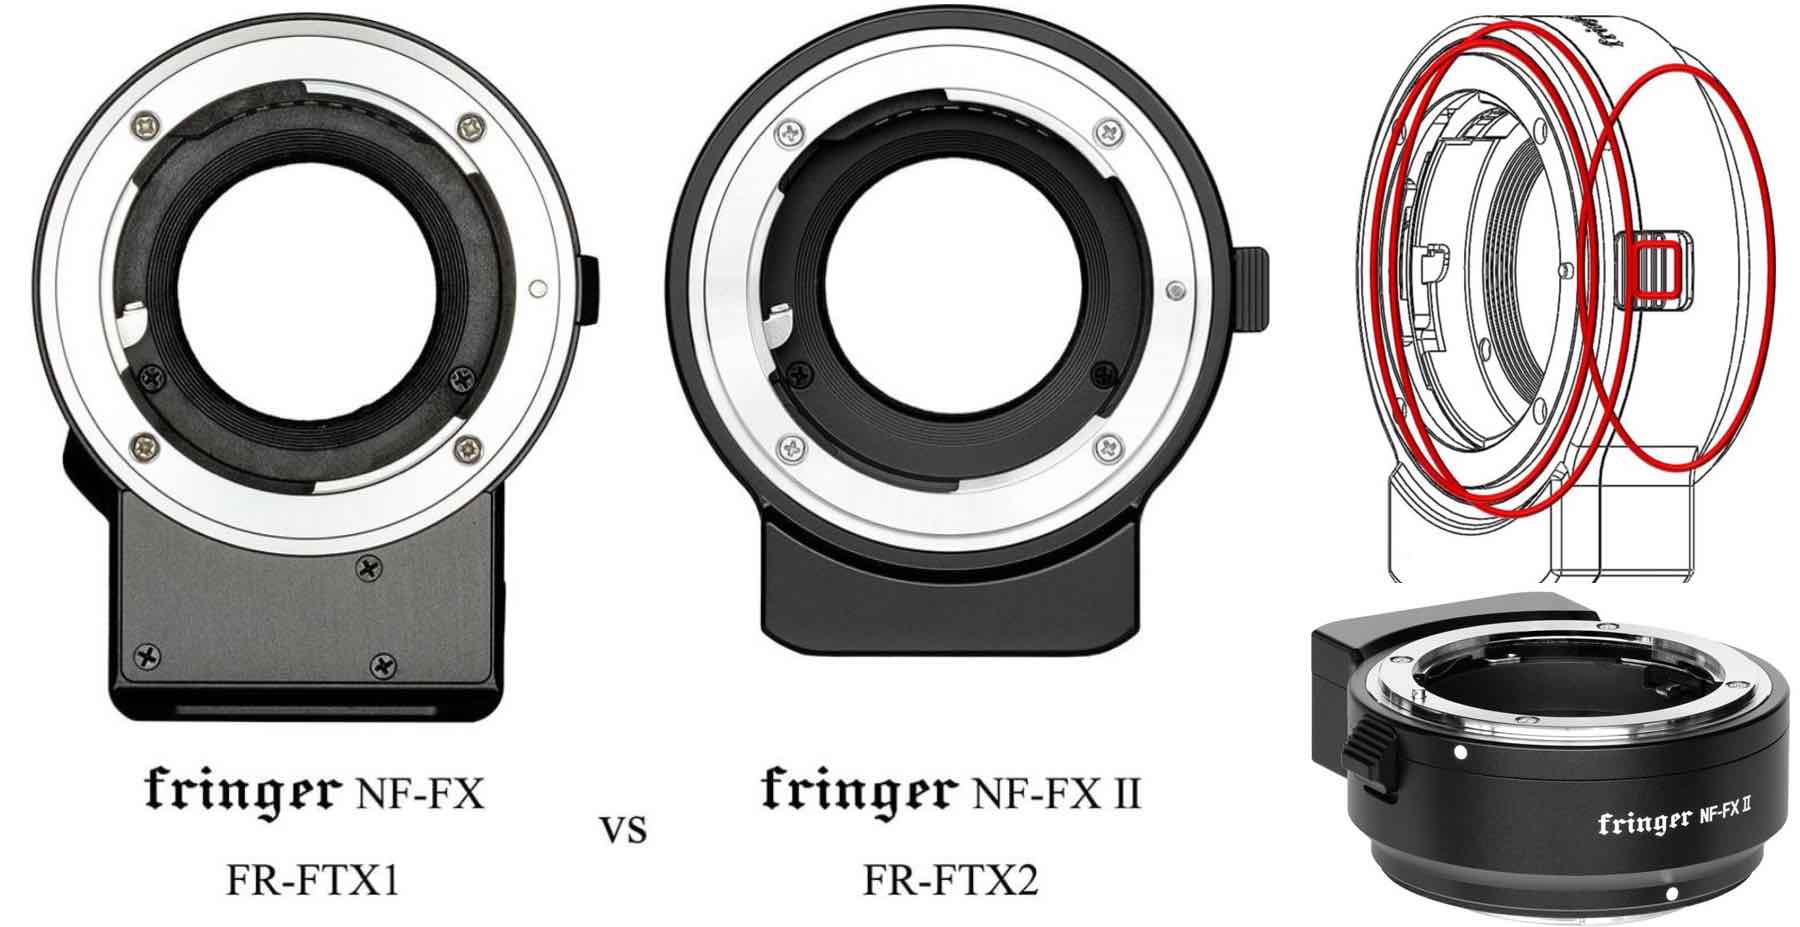 Fringer NF-FX II Released: Smaller and with Weather Sealing - Fuji Rumors